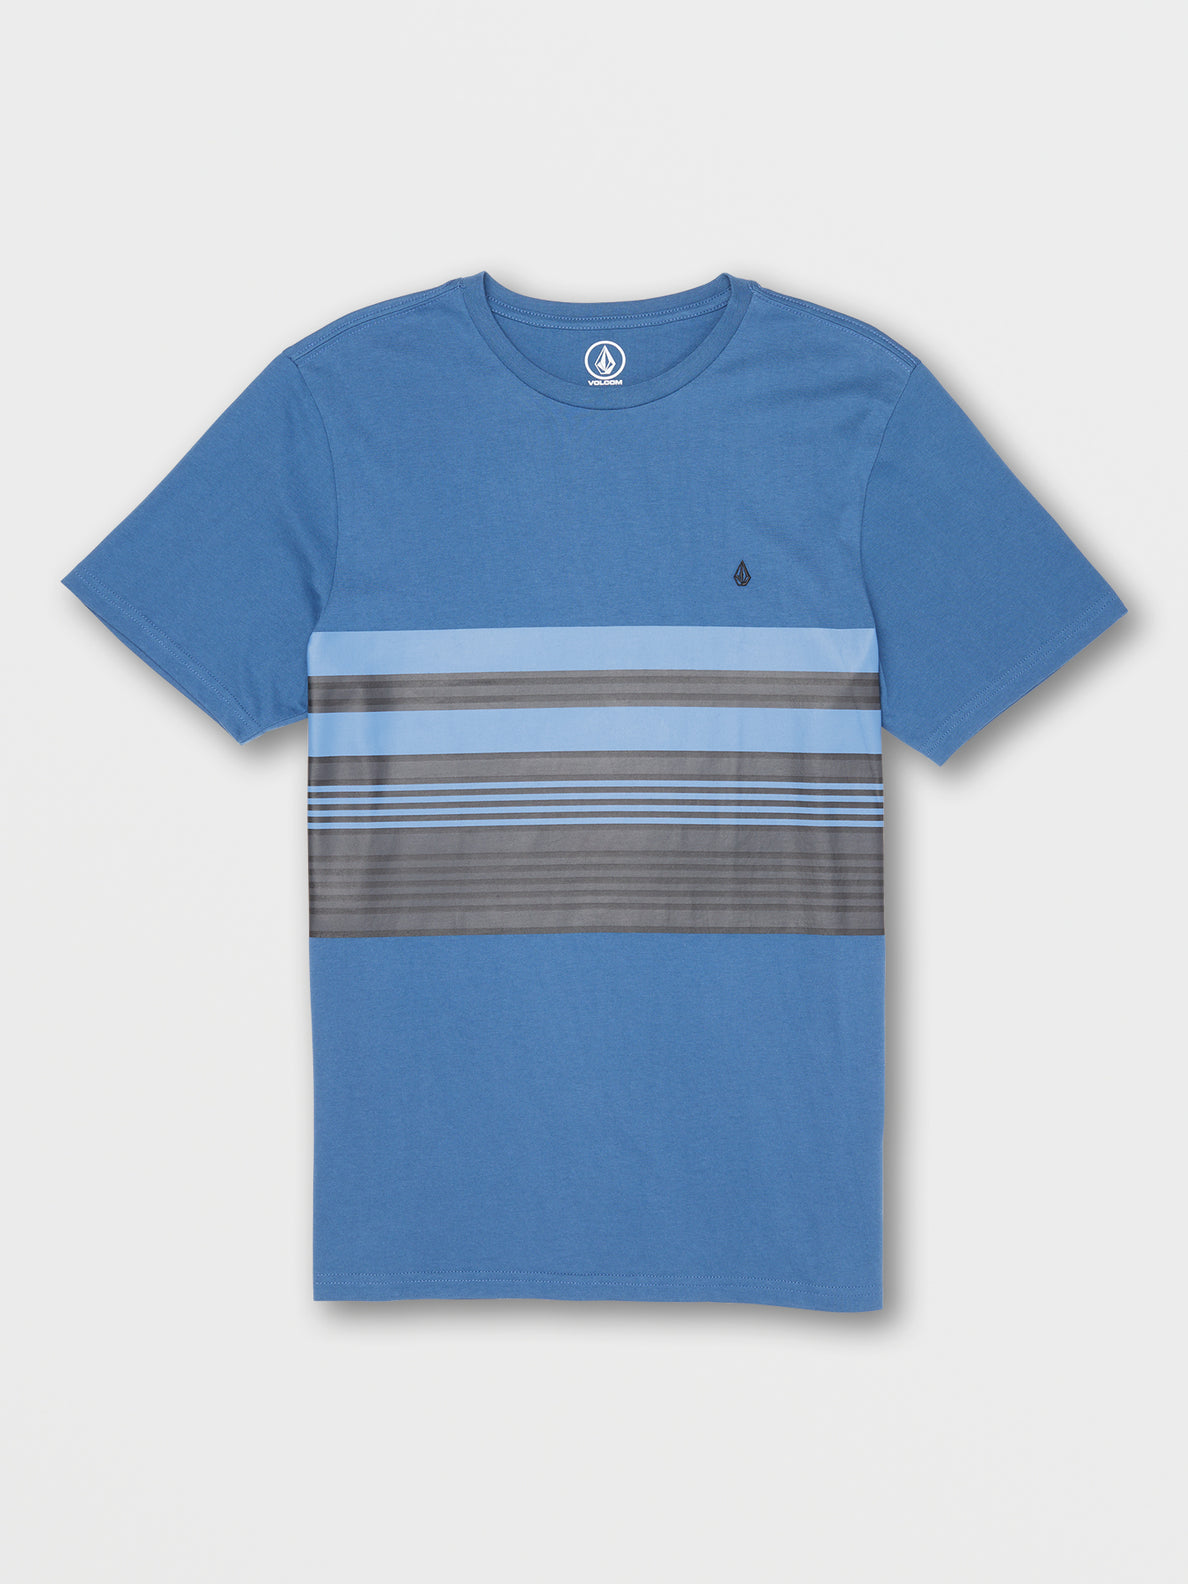 Parables Blocked Crew Tee - Blue Combo